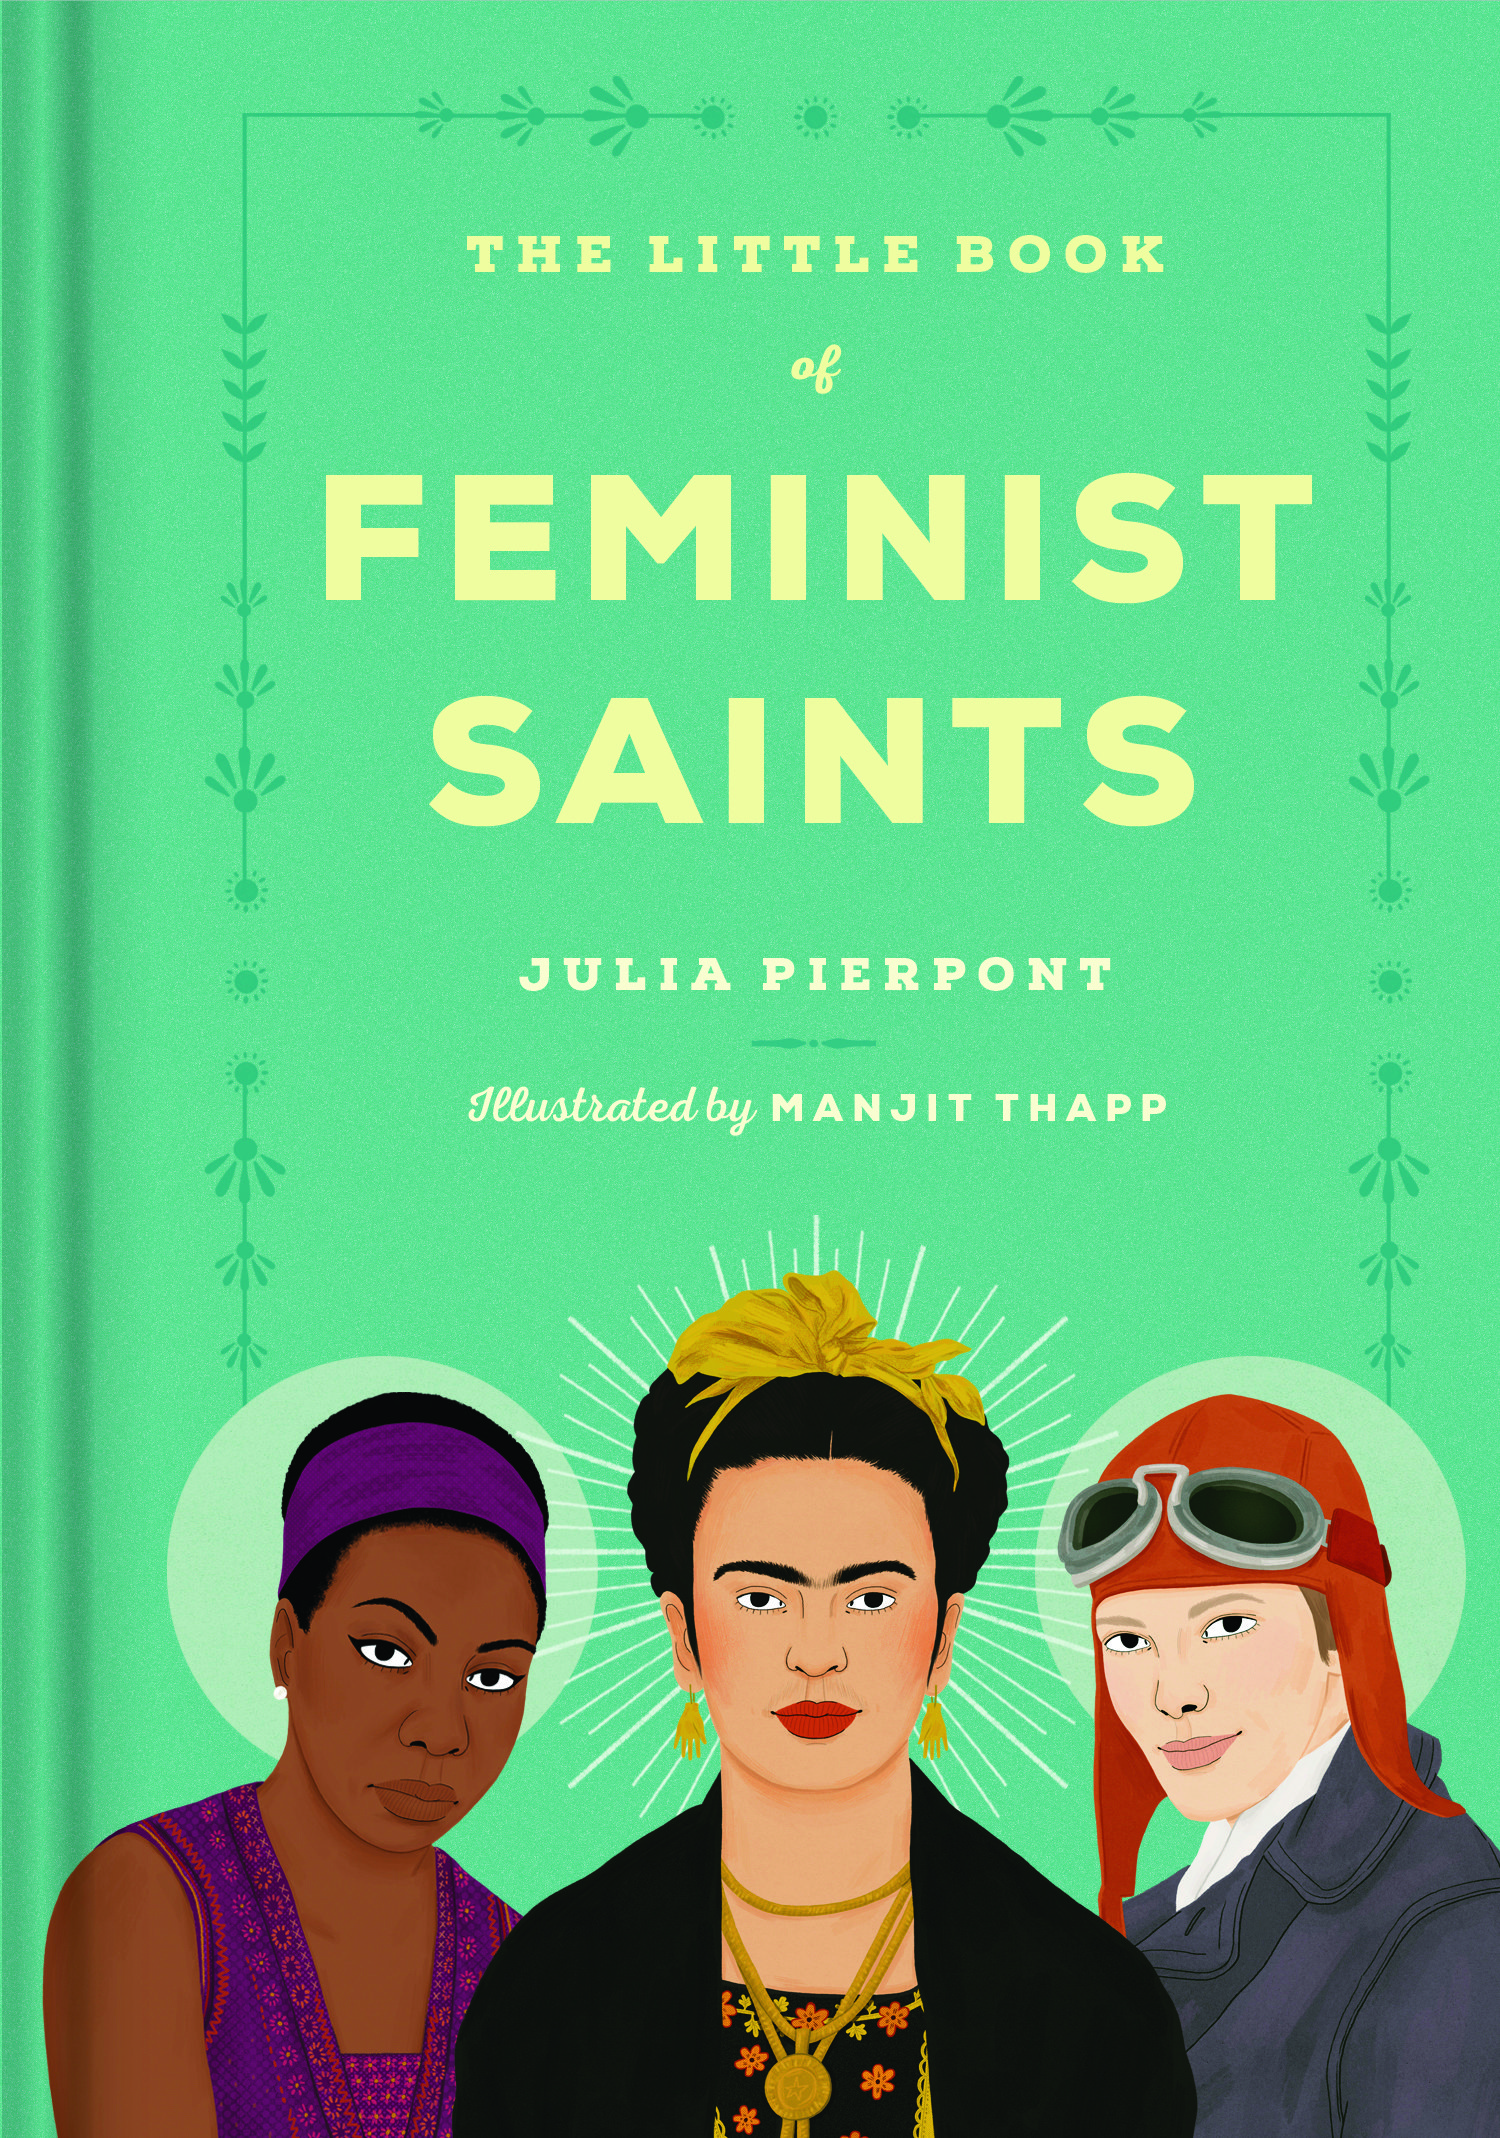 Book Launch: The Little Book of Feminist Saints by Julia Pierpont, Illustrated by Manjitt Thapp — in conversation w/ Julie Buntin